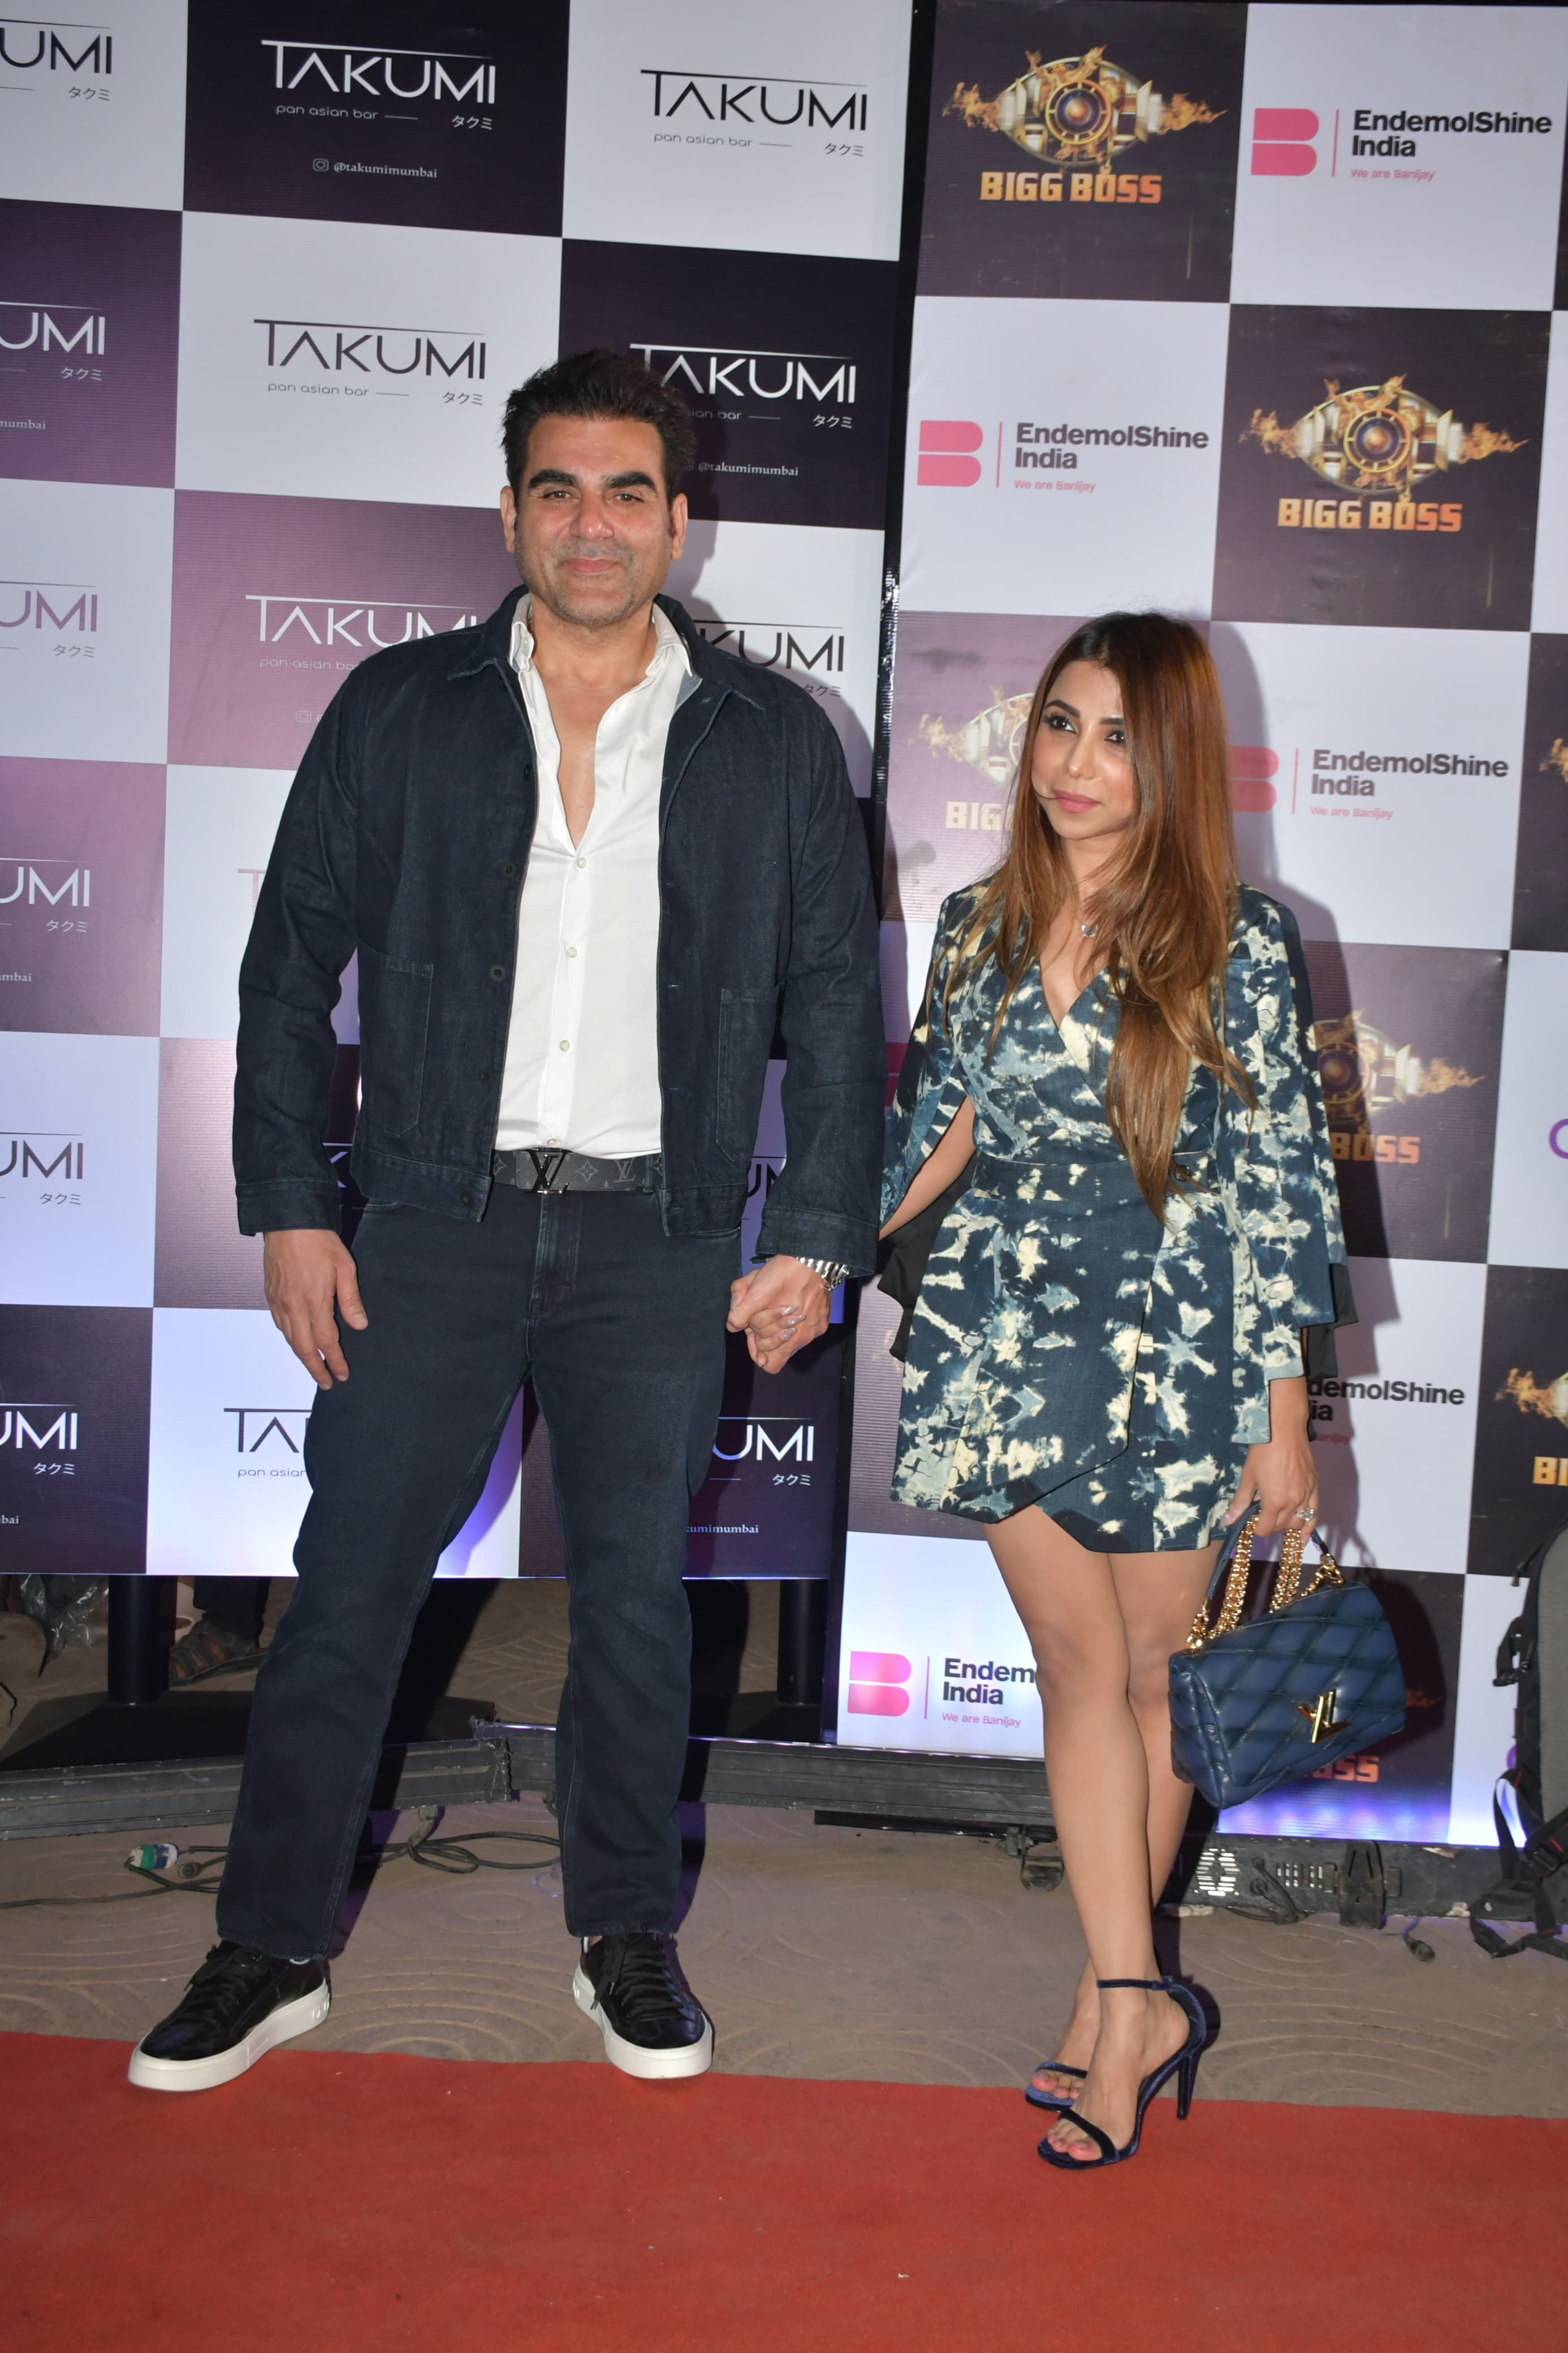 Arbaaz Khan was photographed with his wife Sshura Khan as they attended Bigg Boss reunion party